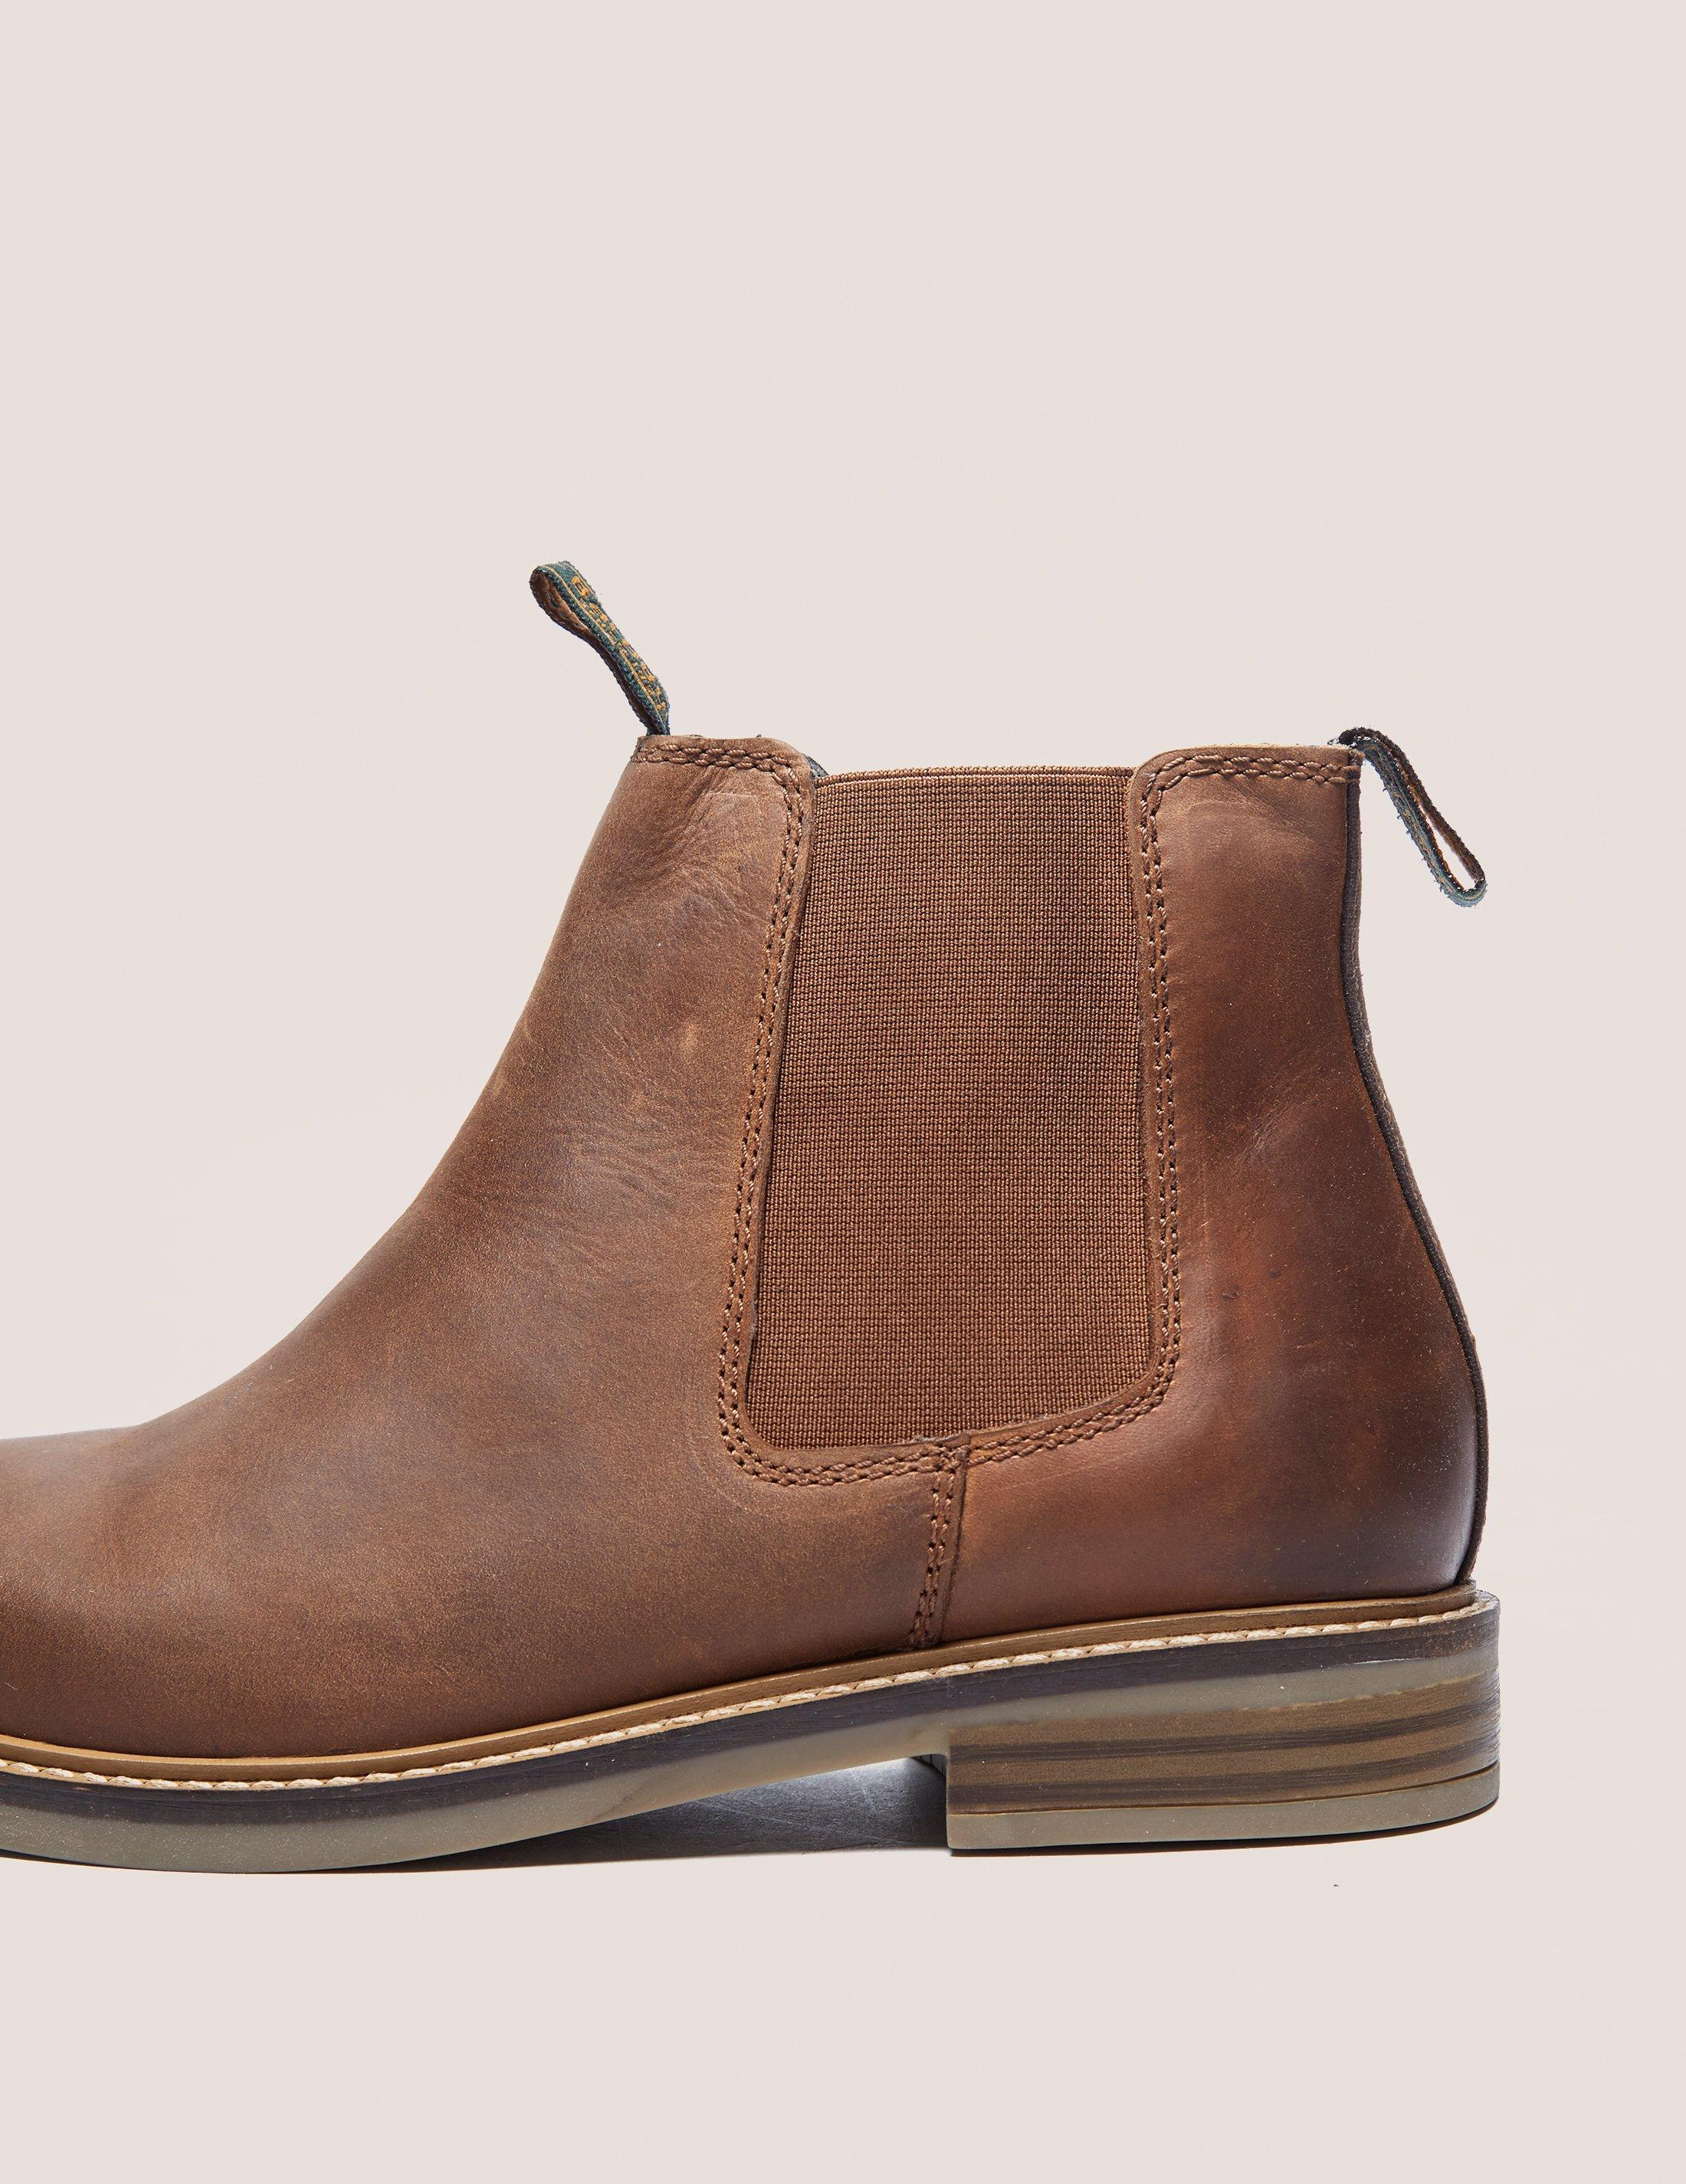 Mens Chelsea Boots Barbour Hotsell, 51% OFF | sportsregras.com